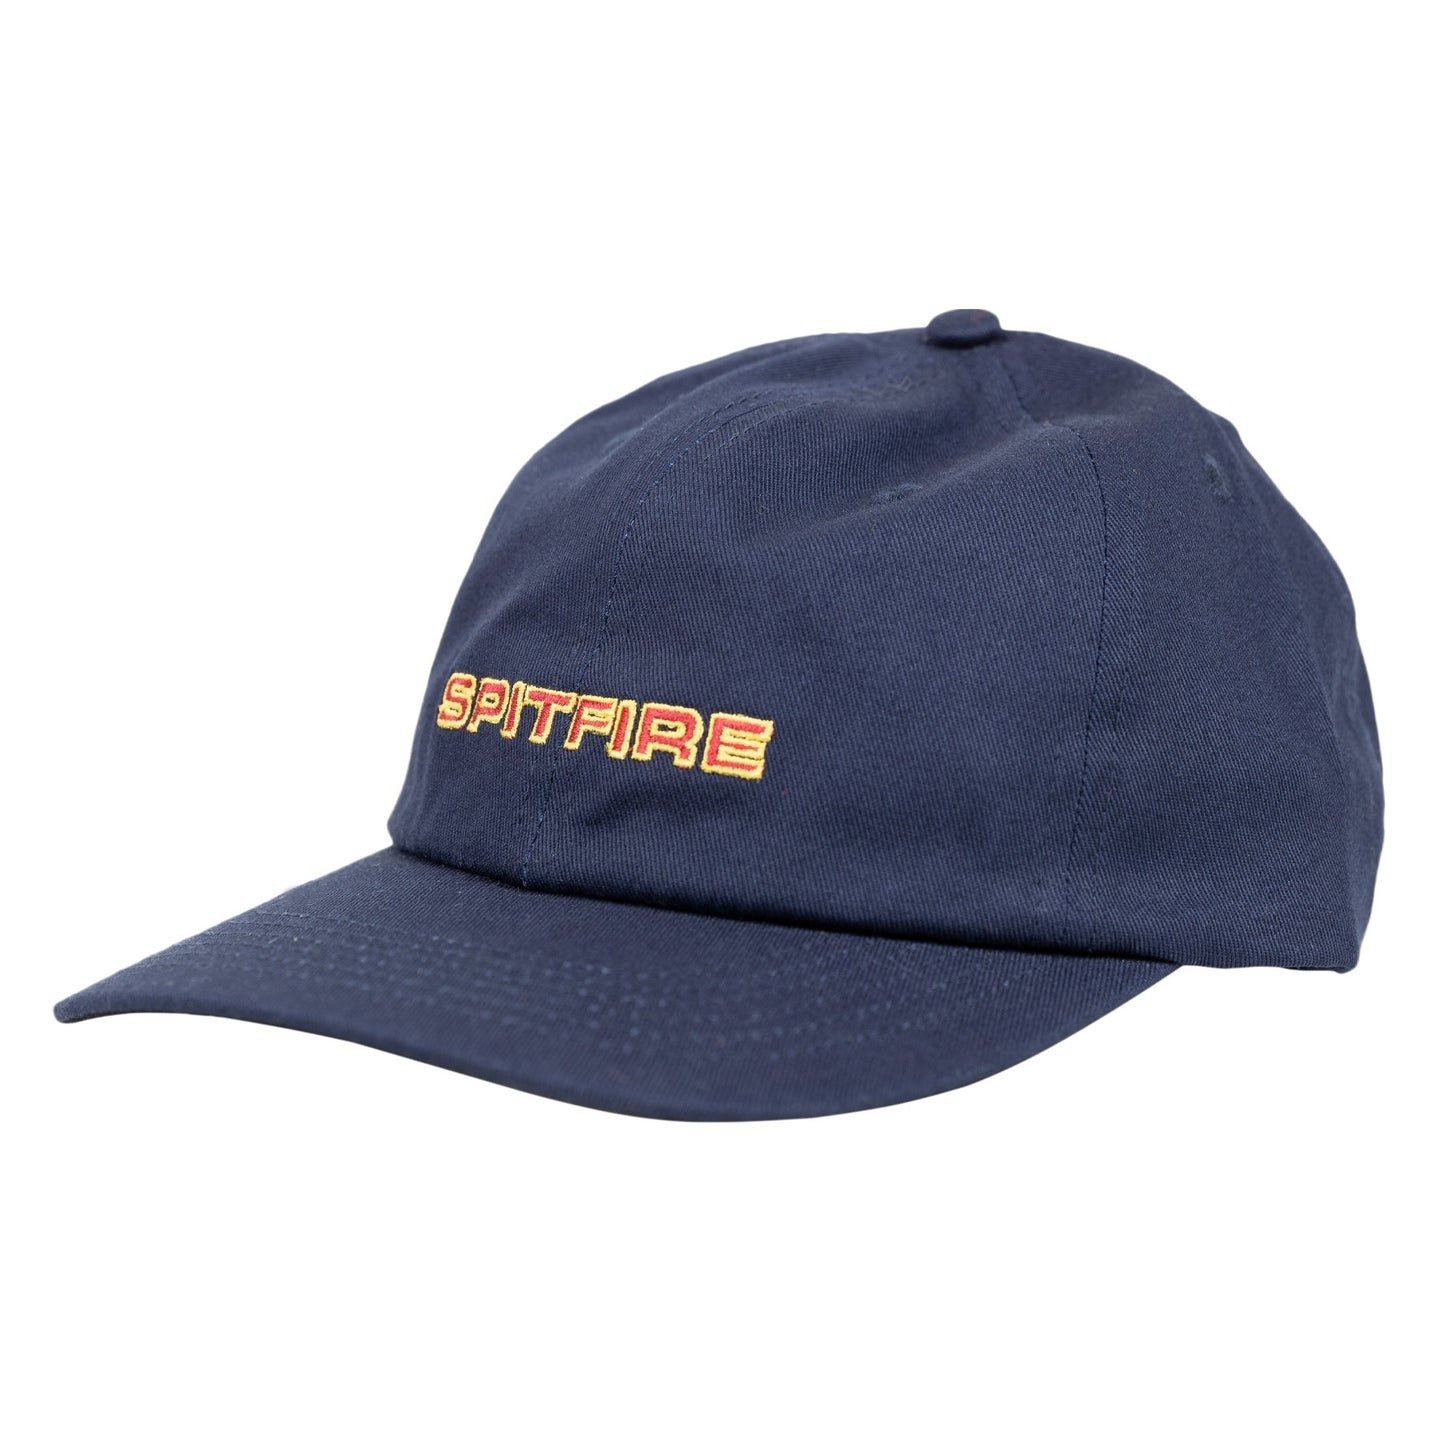 SPITFIRE CLASSIC 87' FILL STRAPBACK NAVY RED GOLD